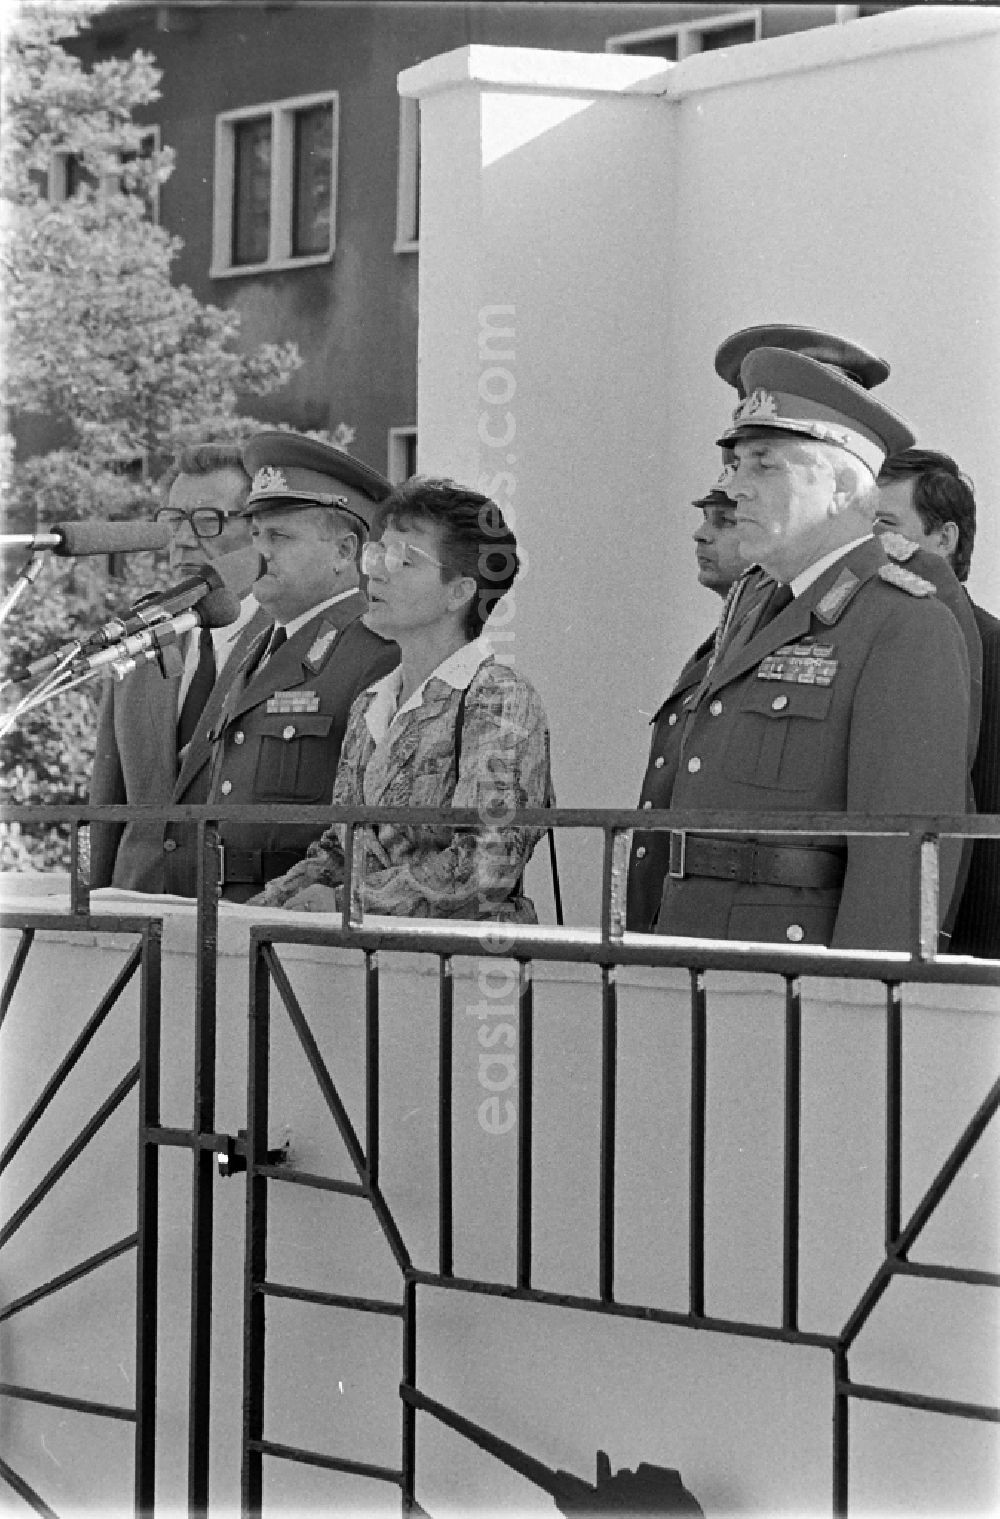 Goldberg: Honorary grandstand with Major General Horst Stechbarth and soldiers and officers of Panzer Regiment 8 (PR-8) on the occasion of the ceremonial and media-effective dissolution of the troop unit on the grounds of the Artur-Becker barracks in Goldberg in the state of Mecklenburg-Western Pomerania in the area of the former GDR, German Democratic Republic